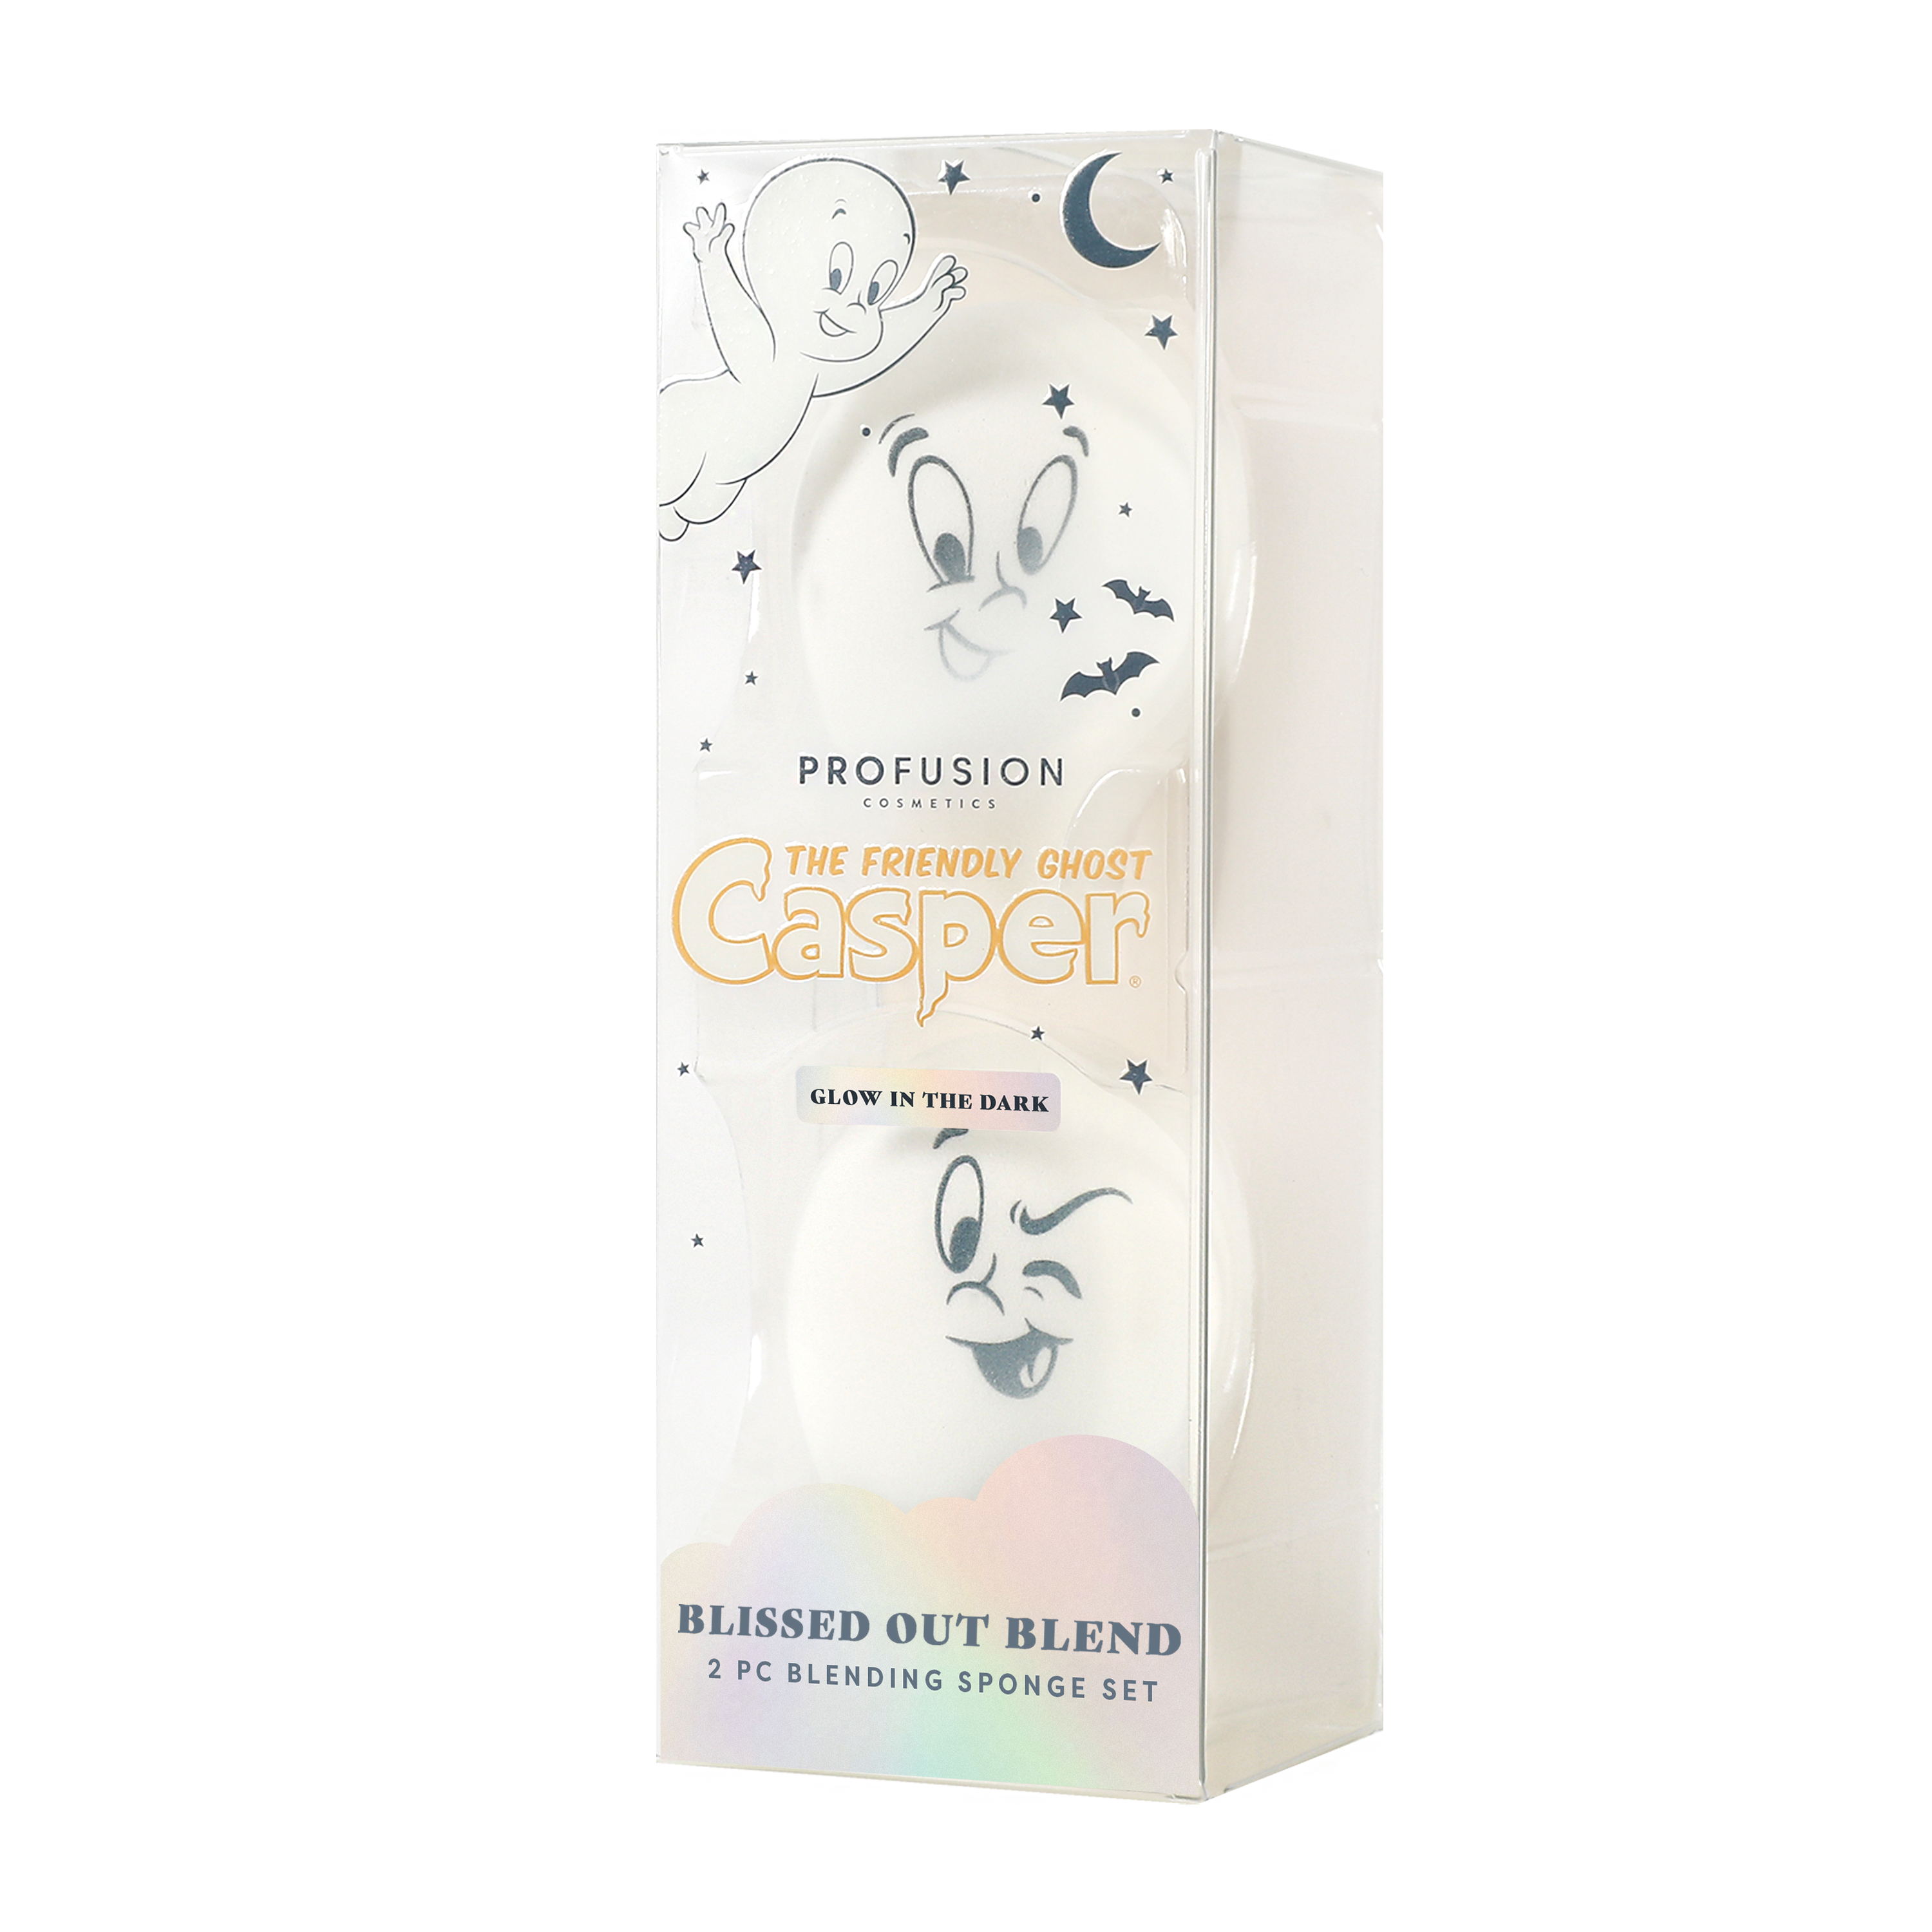 Casper The Friendly Ghost  Blissed out Blend Glow In The Dark 2 PC Bl -  Profusion Cosmetics